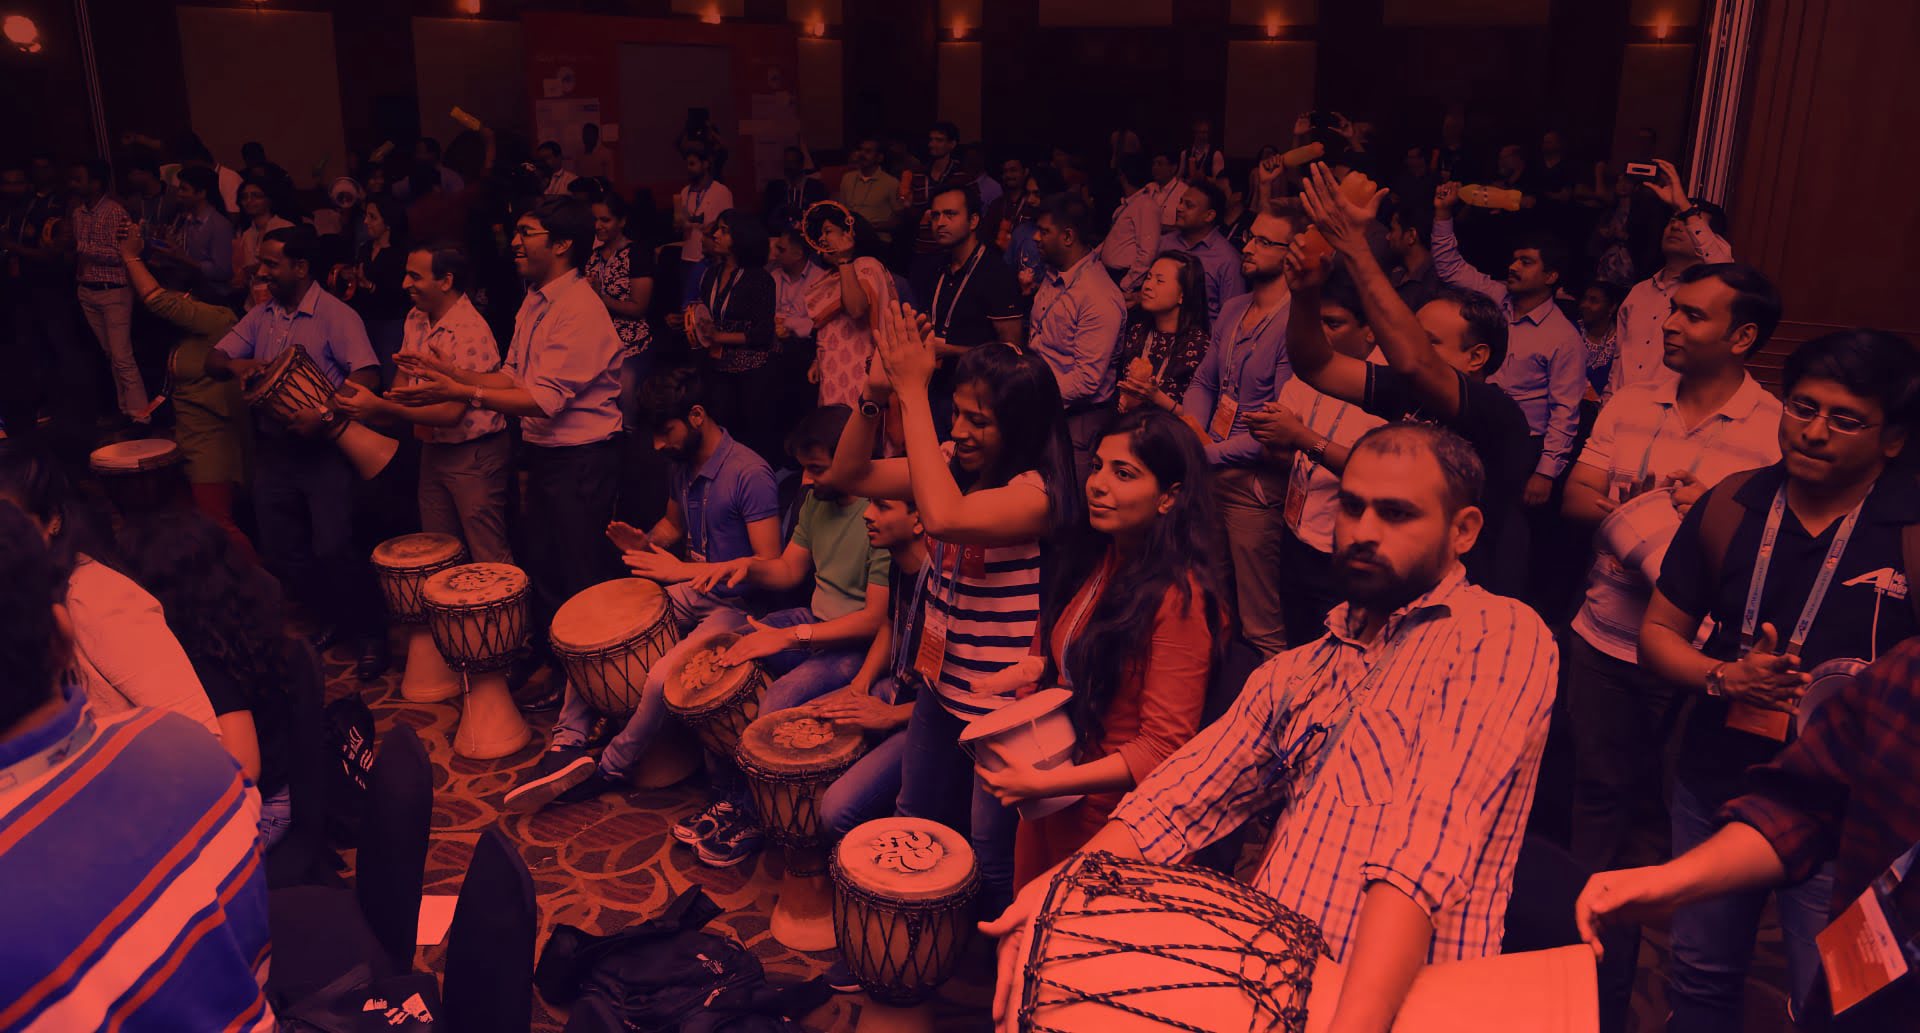 Join us for Agile India, October 11-18